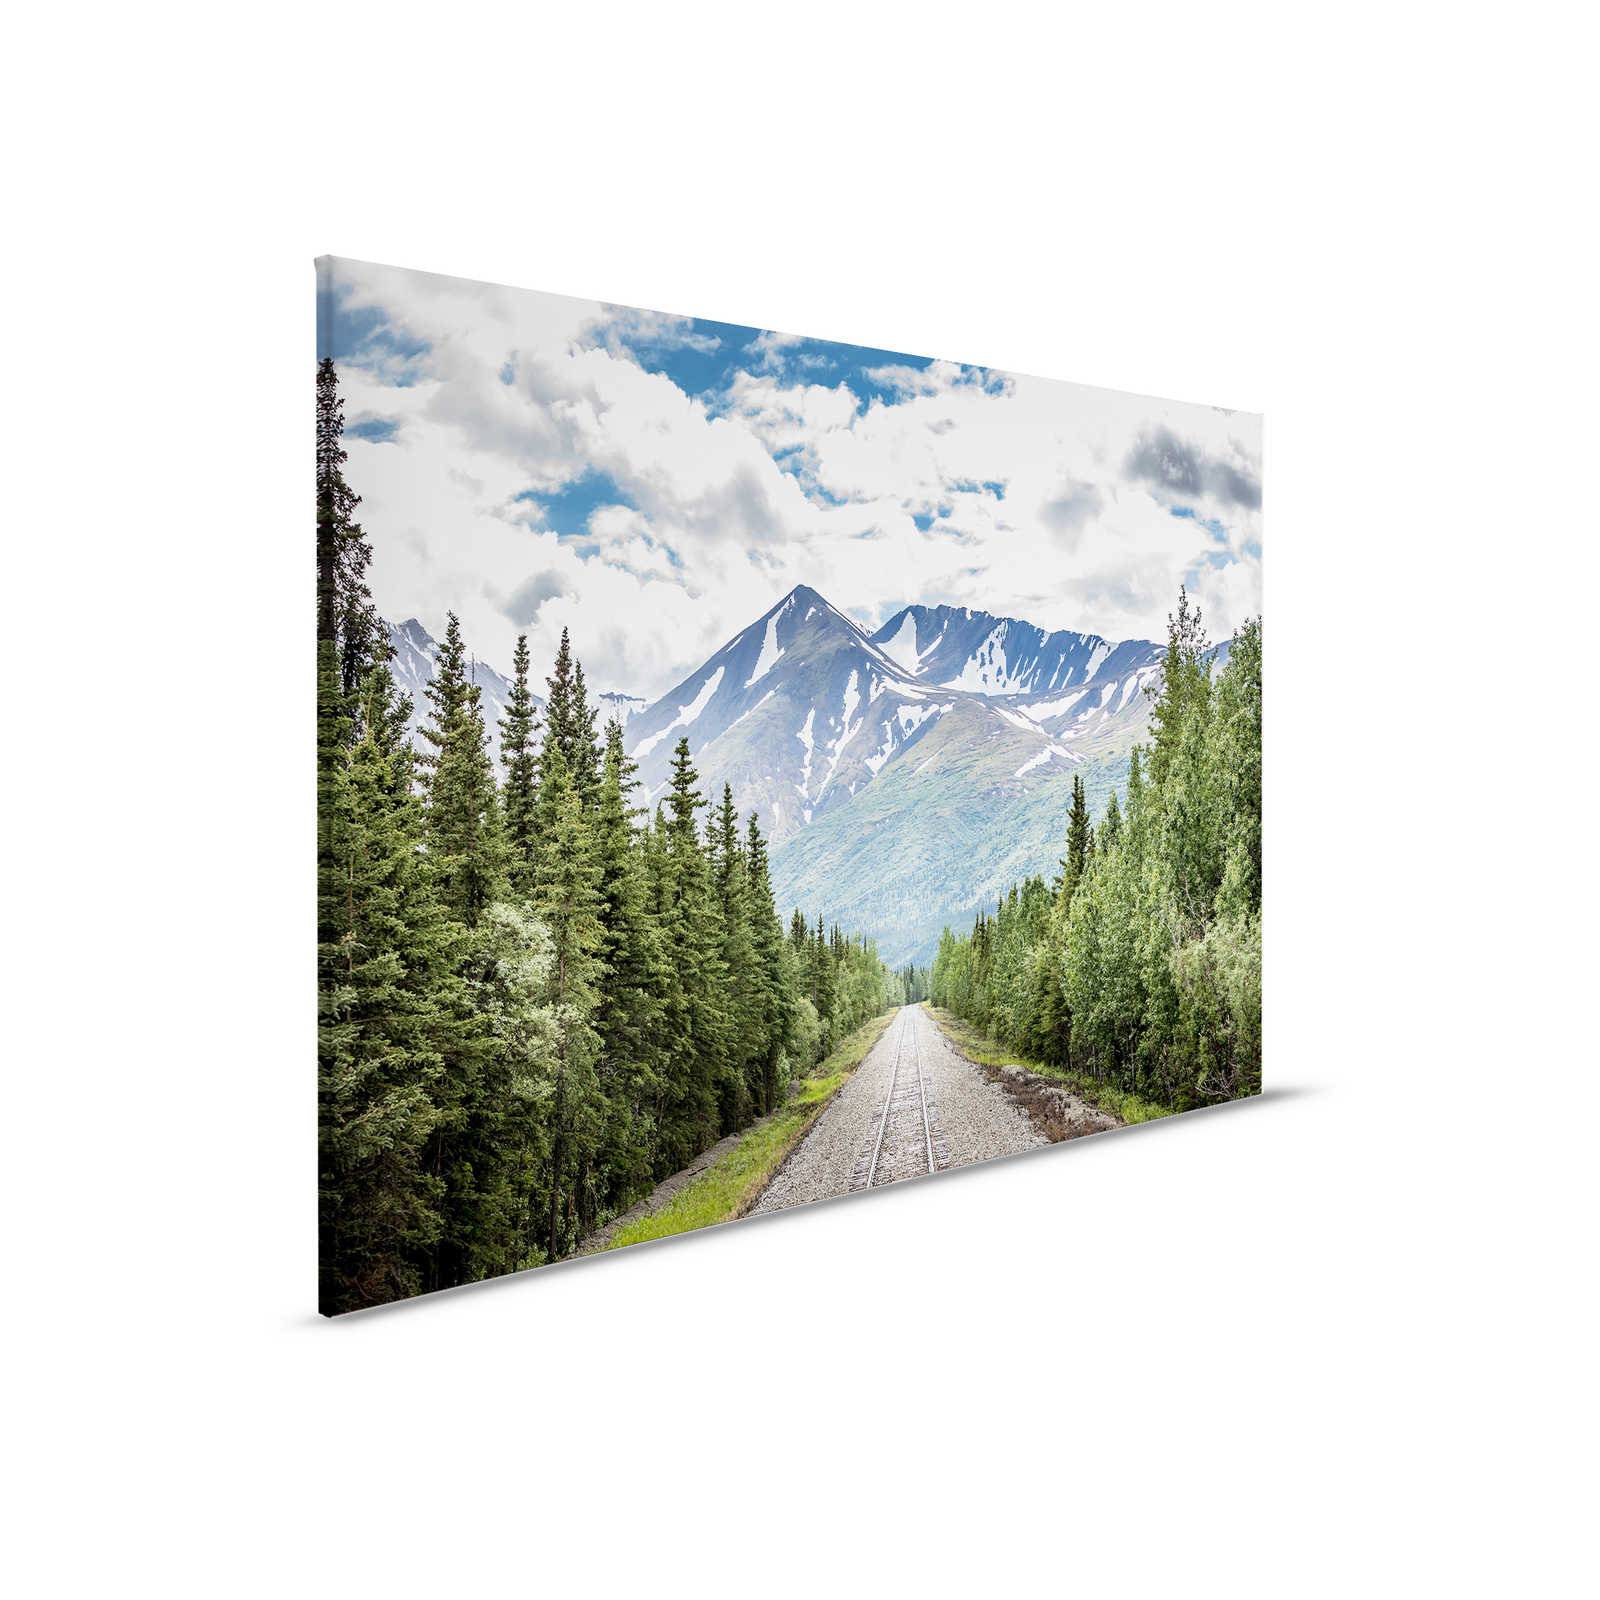         Canvas painting with train tracks through a forest by the mountains - 0.90 m x 0.60 m
    